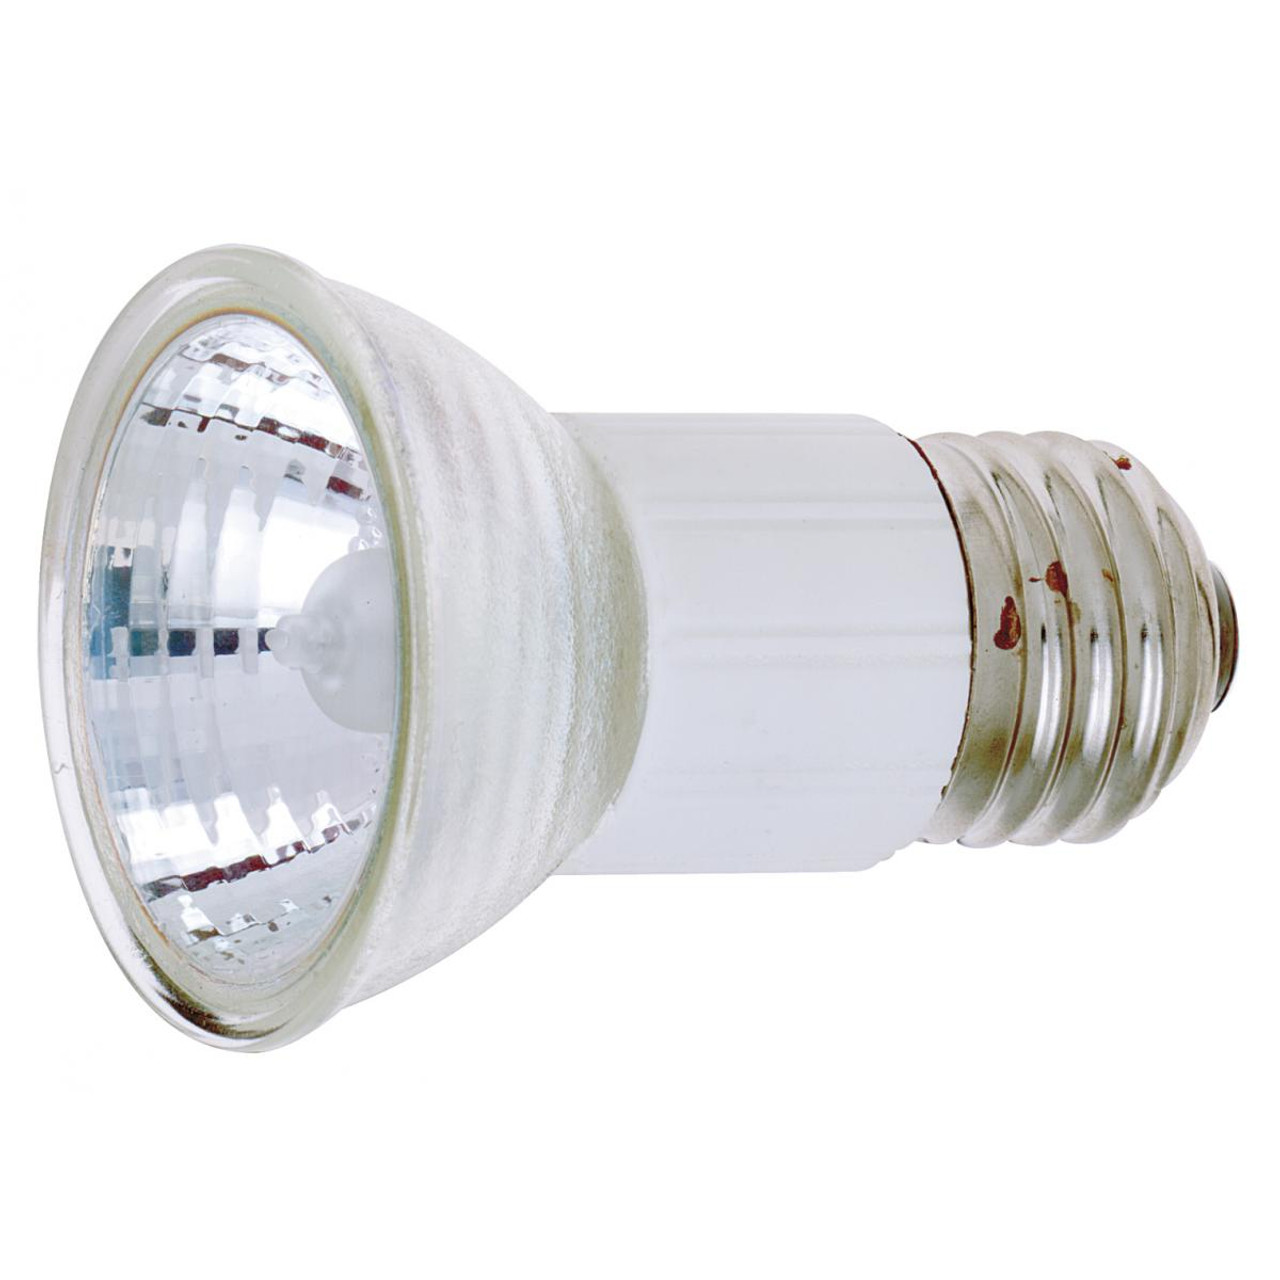 REPLACEMENT BULB FOR LIGHT BULB / LAMP JDR-C GU10 50W 120V 50W